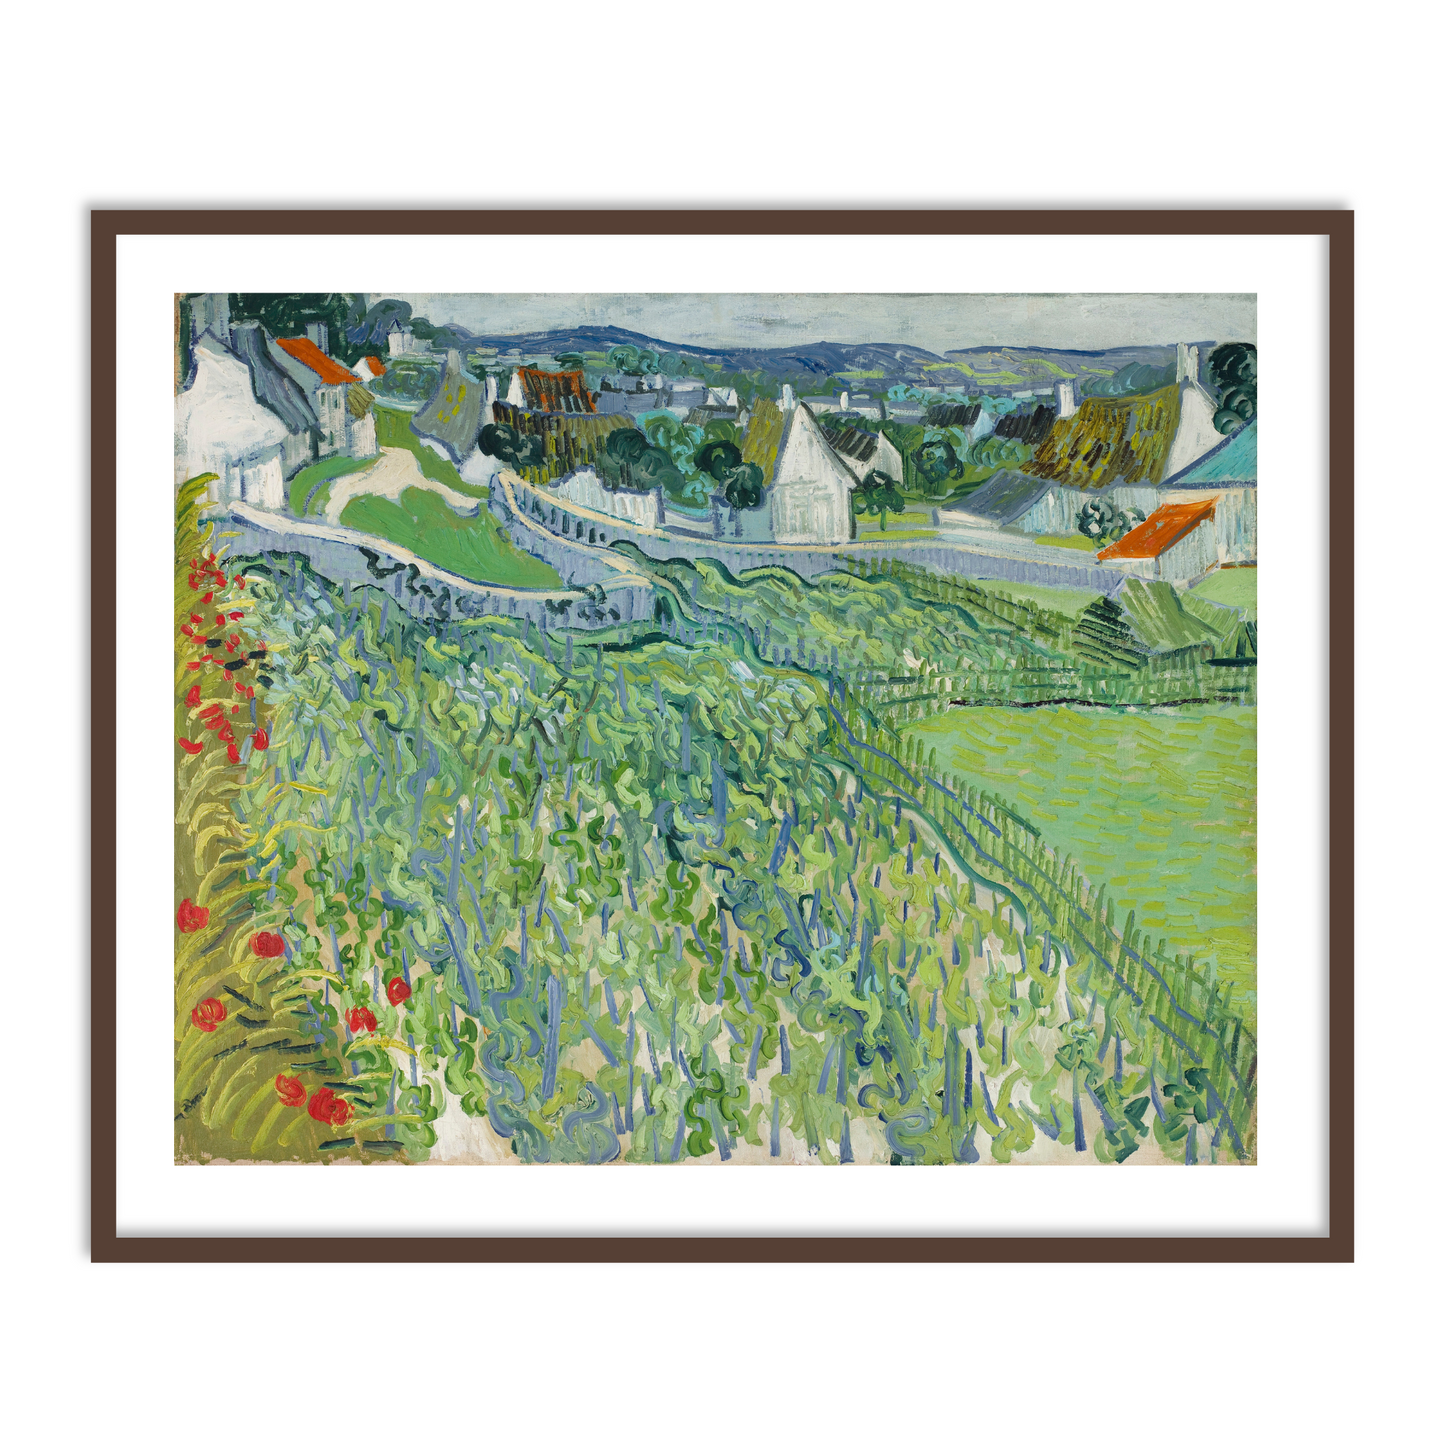 Vineyards at Auvers by Vincent Van Gogh Famous Painting Wall Art